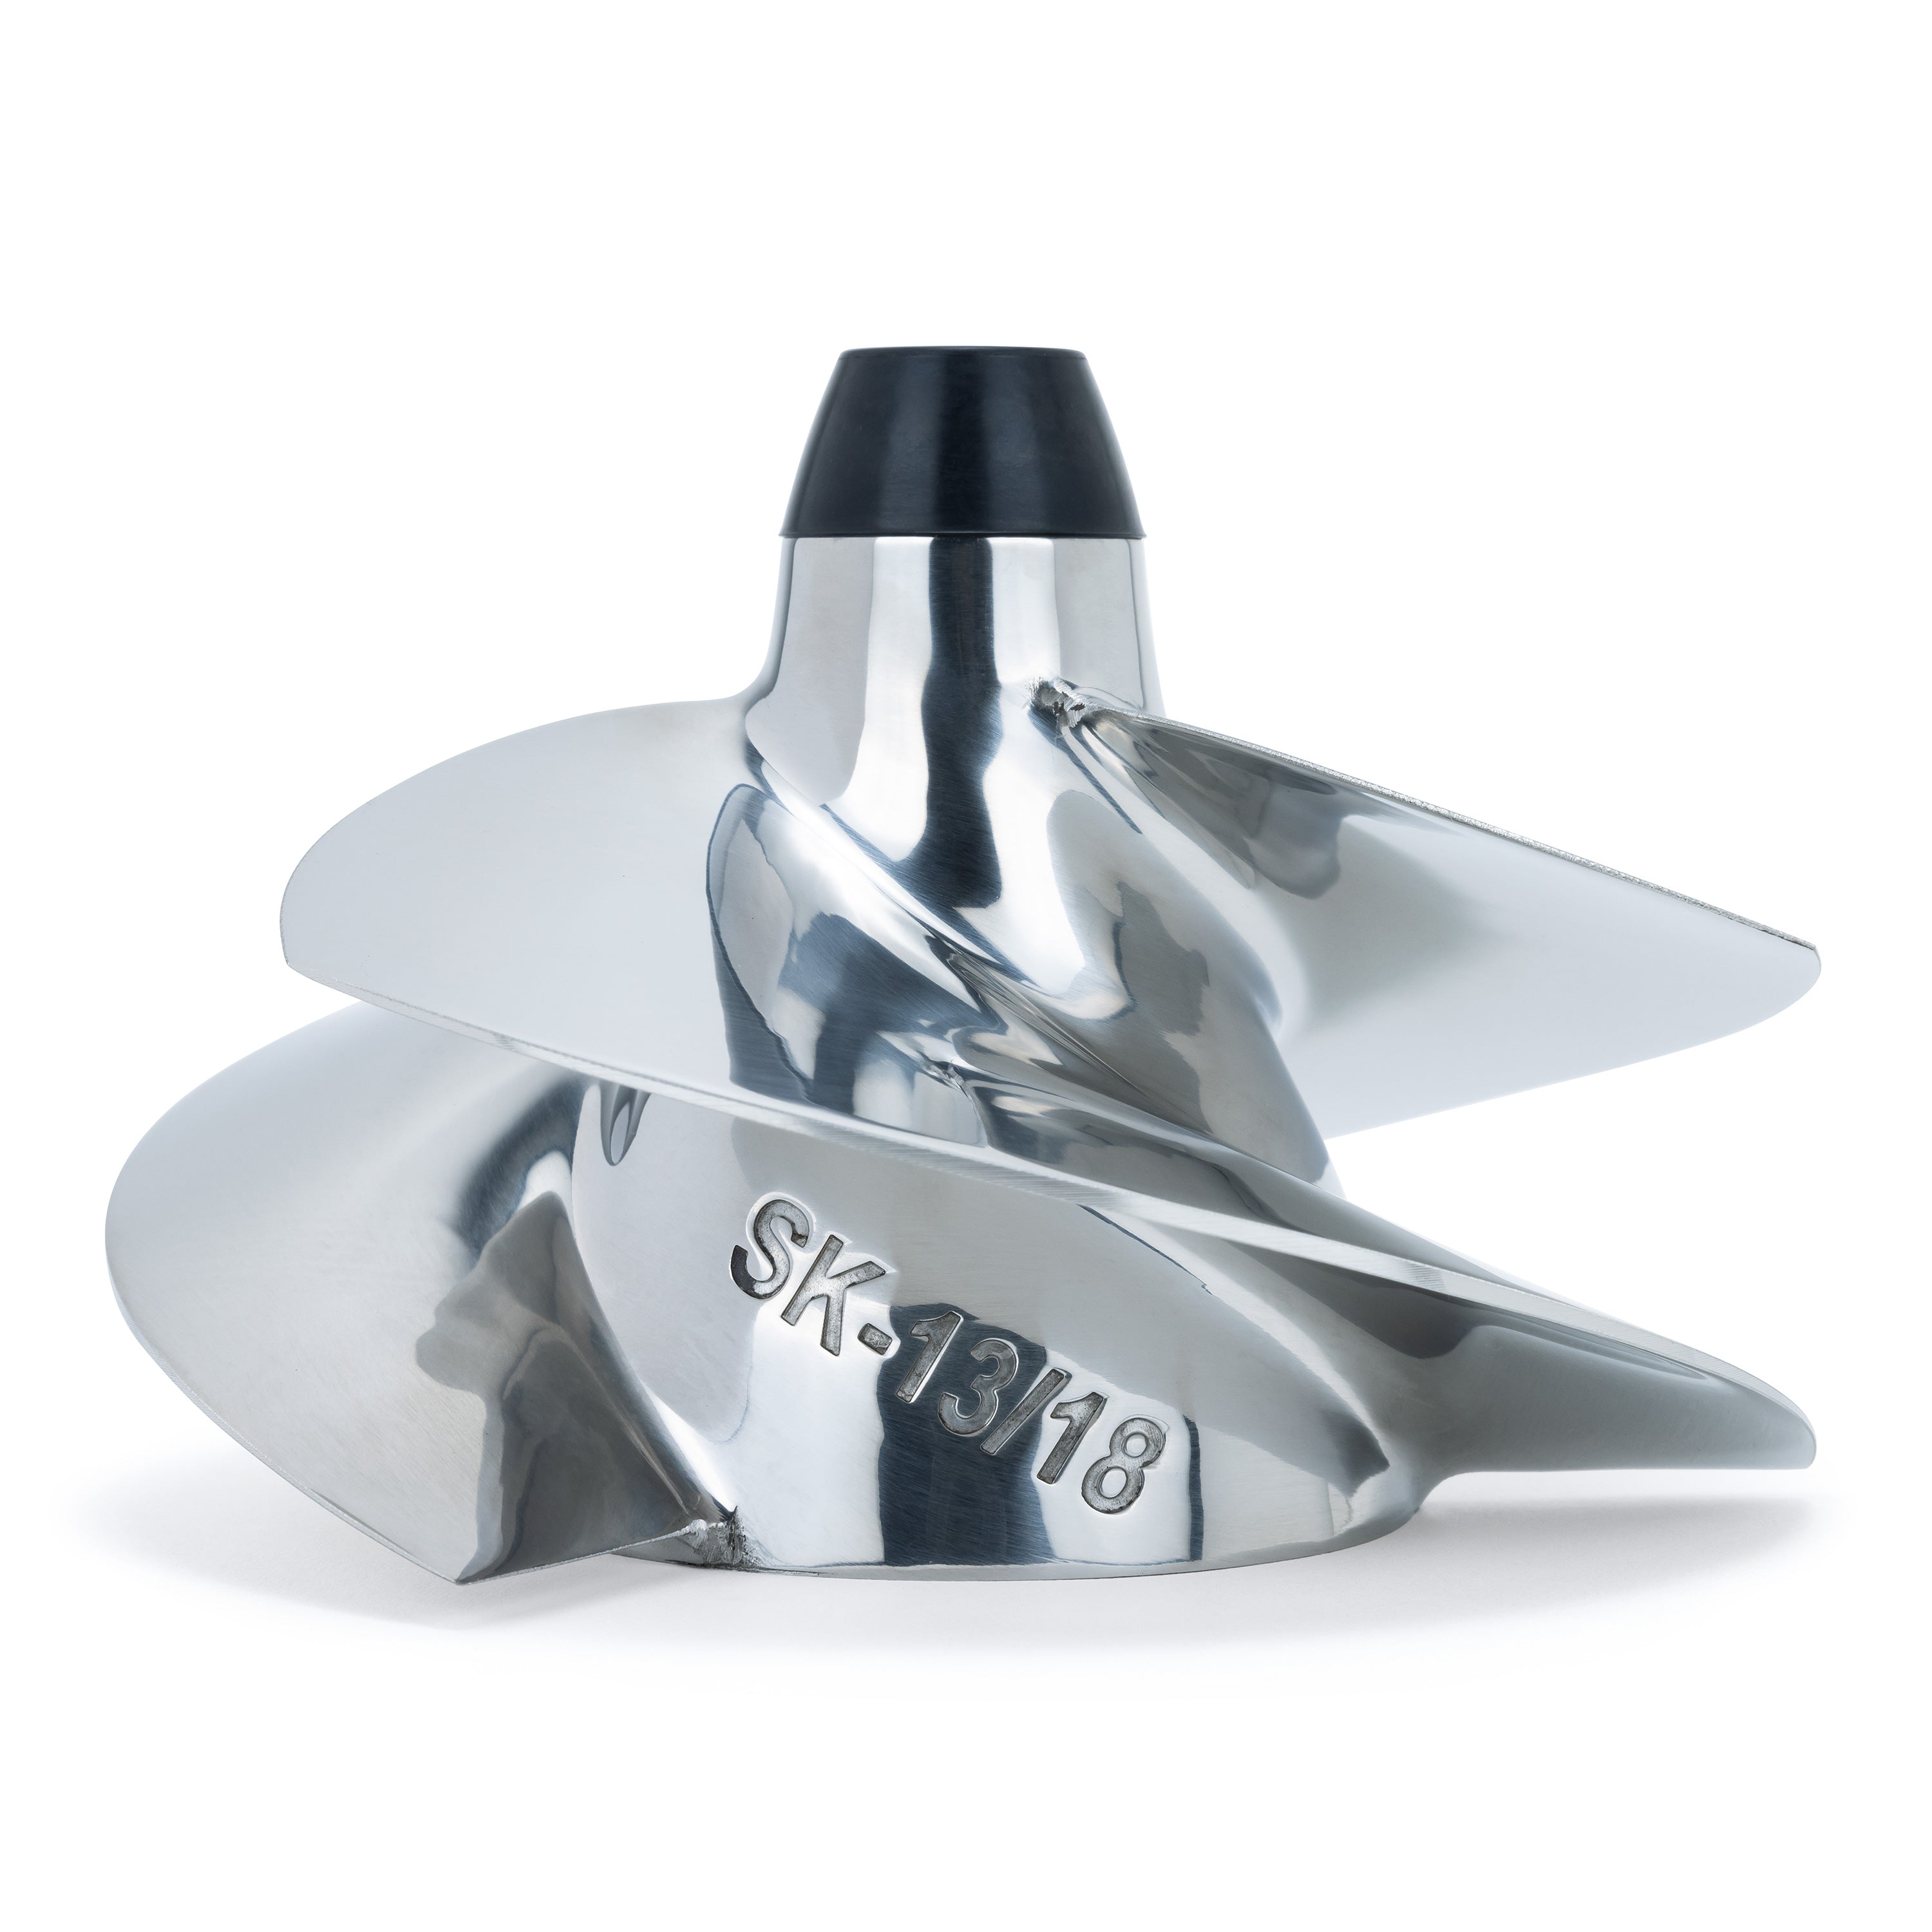 Solas Concord Series Impellers for Tuned Sea-Doo Spark 60HP & 90HP - 13/18  Solas Impeller (For EVP Spark Turbo)